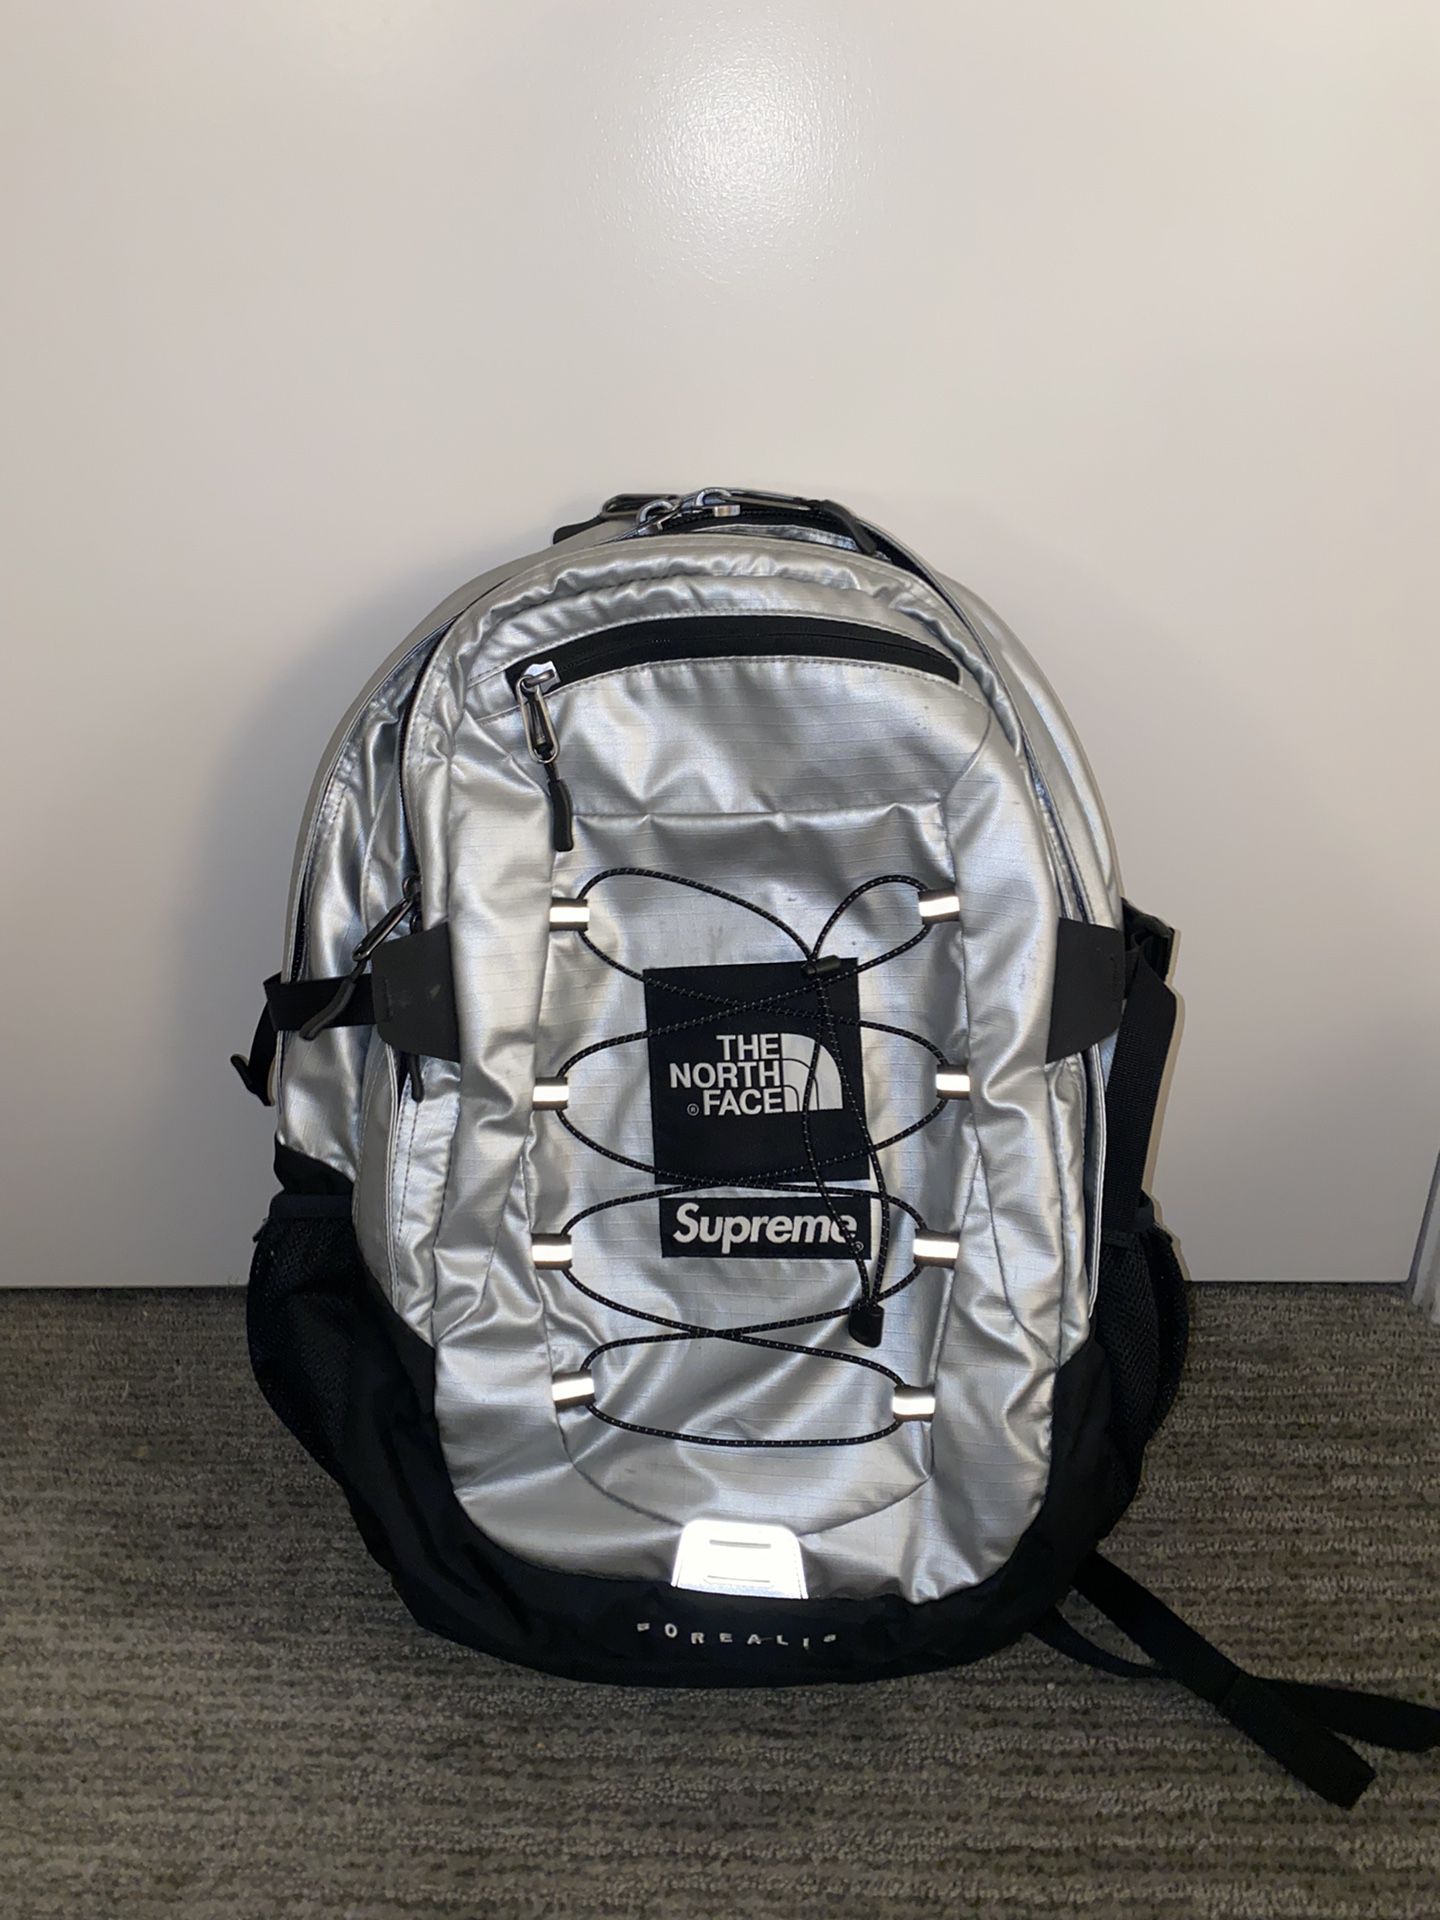 The North Face/Supreme Backpack